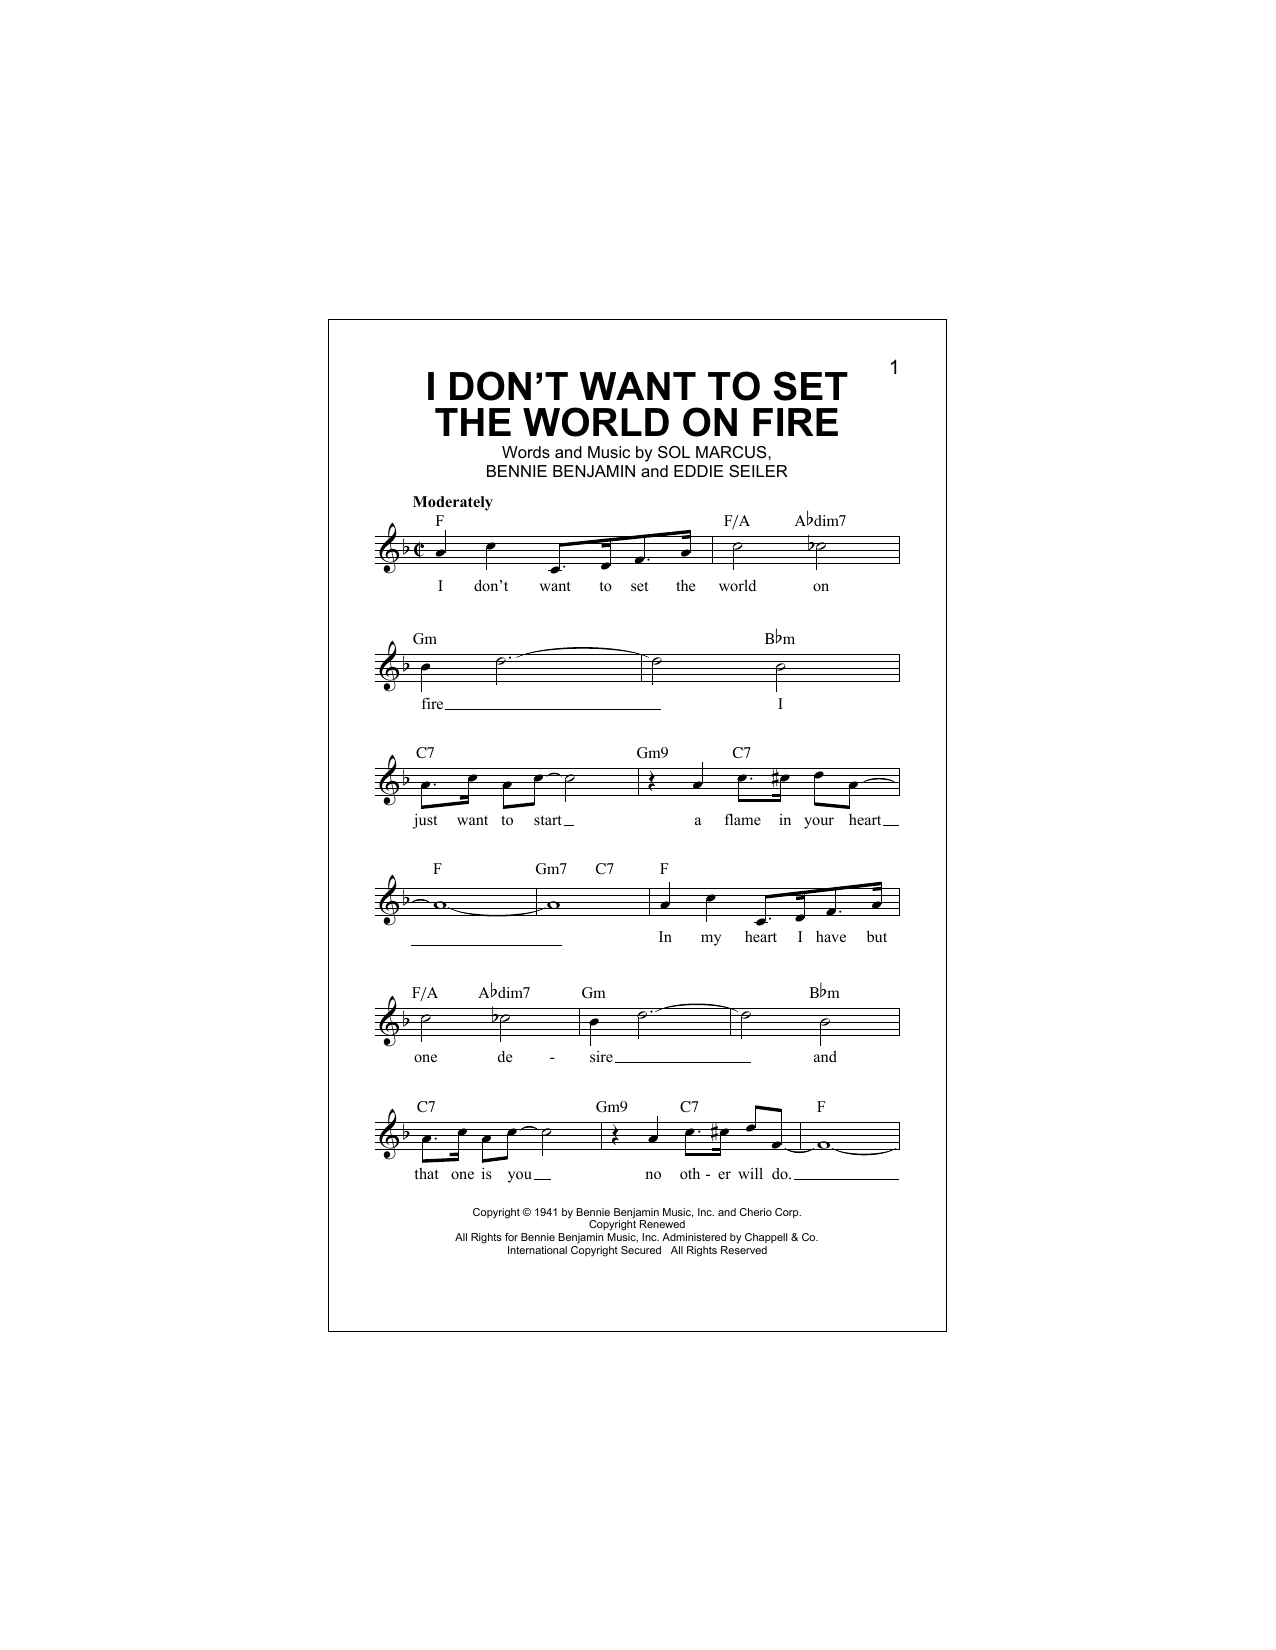 Download The Ink Spots I Don't Want To Set The World On Fire Sheet Music